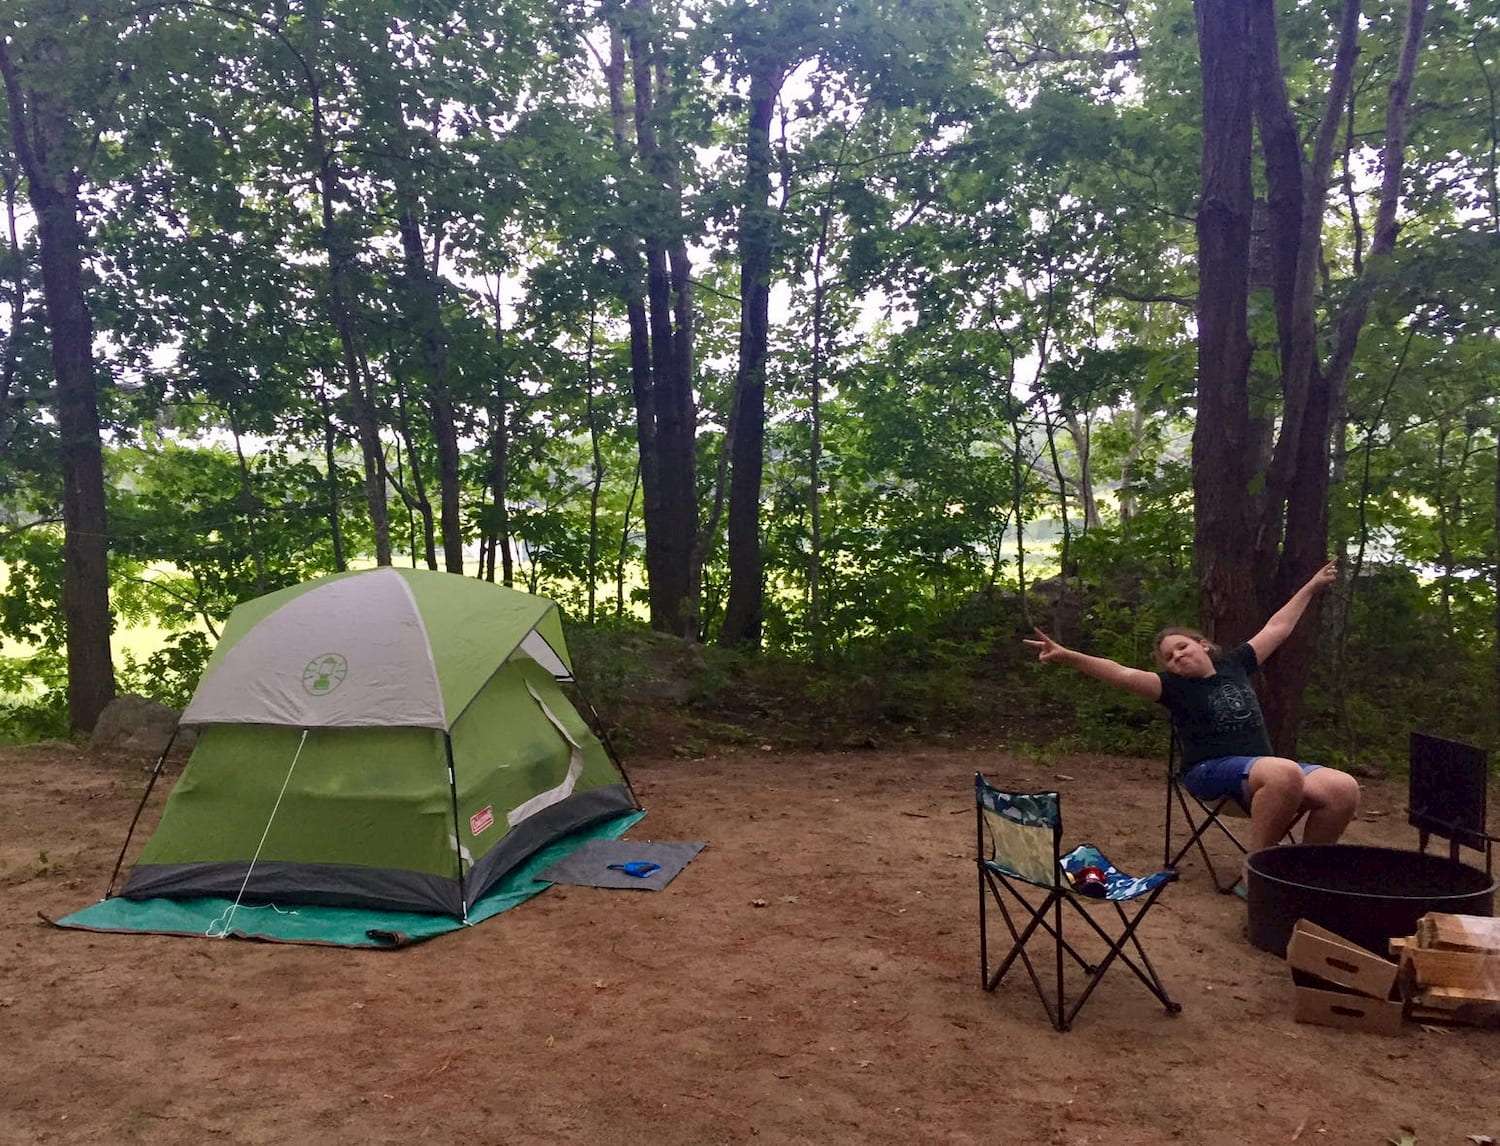 7 Best Campgrounds for Camping near Portland, Maine